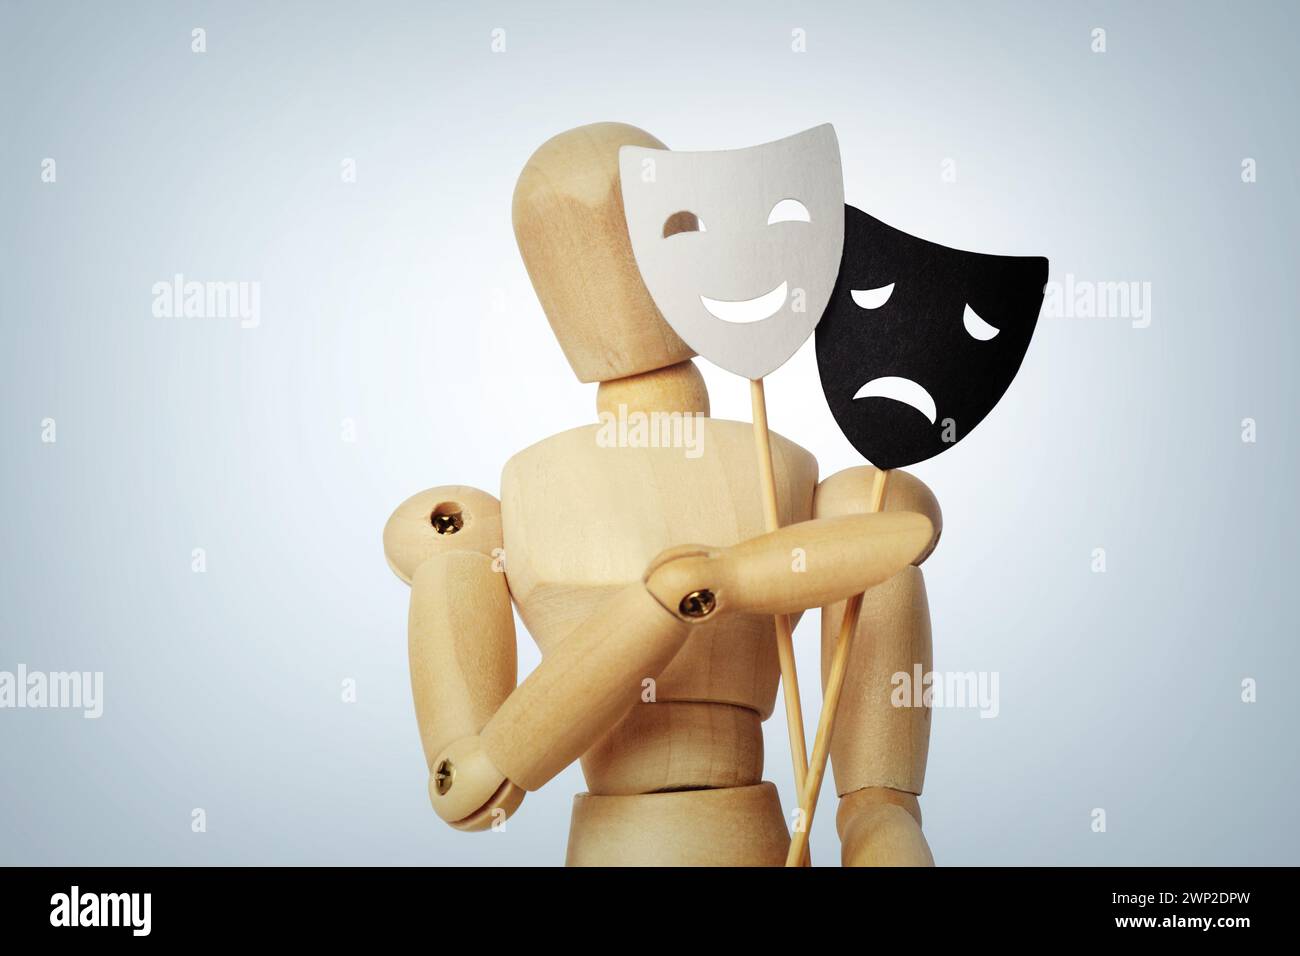 Wooden mannequin with two masks showing different emotions - Concept of psychology, mood change and bipolar disorder Stock Photo